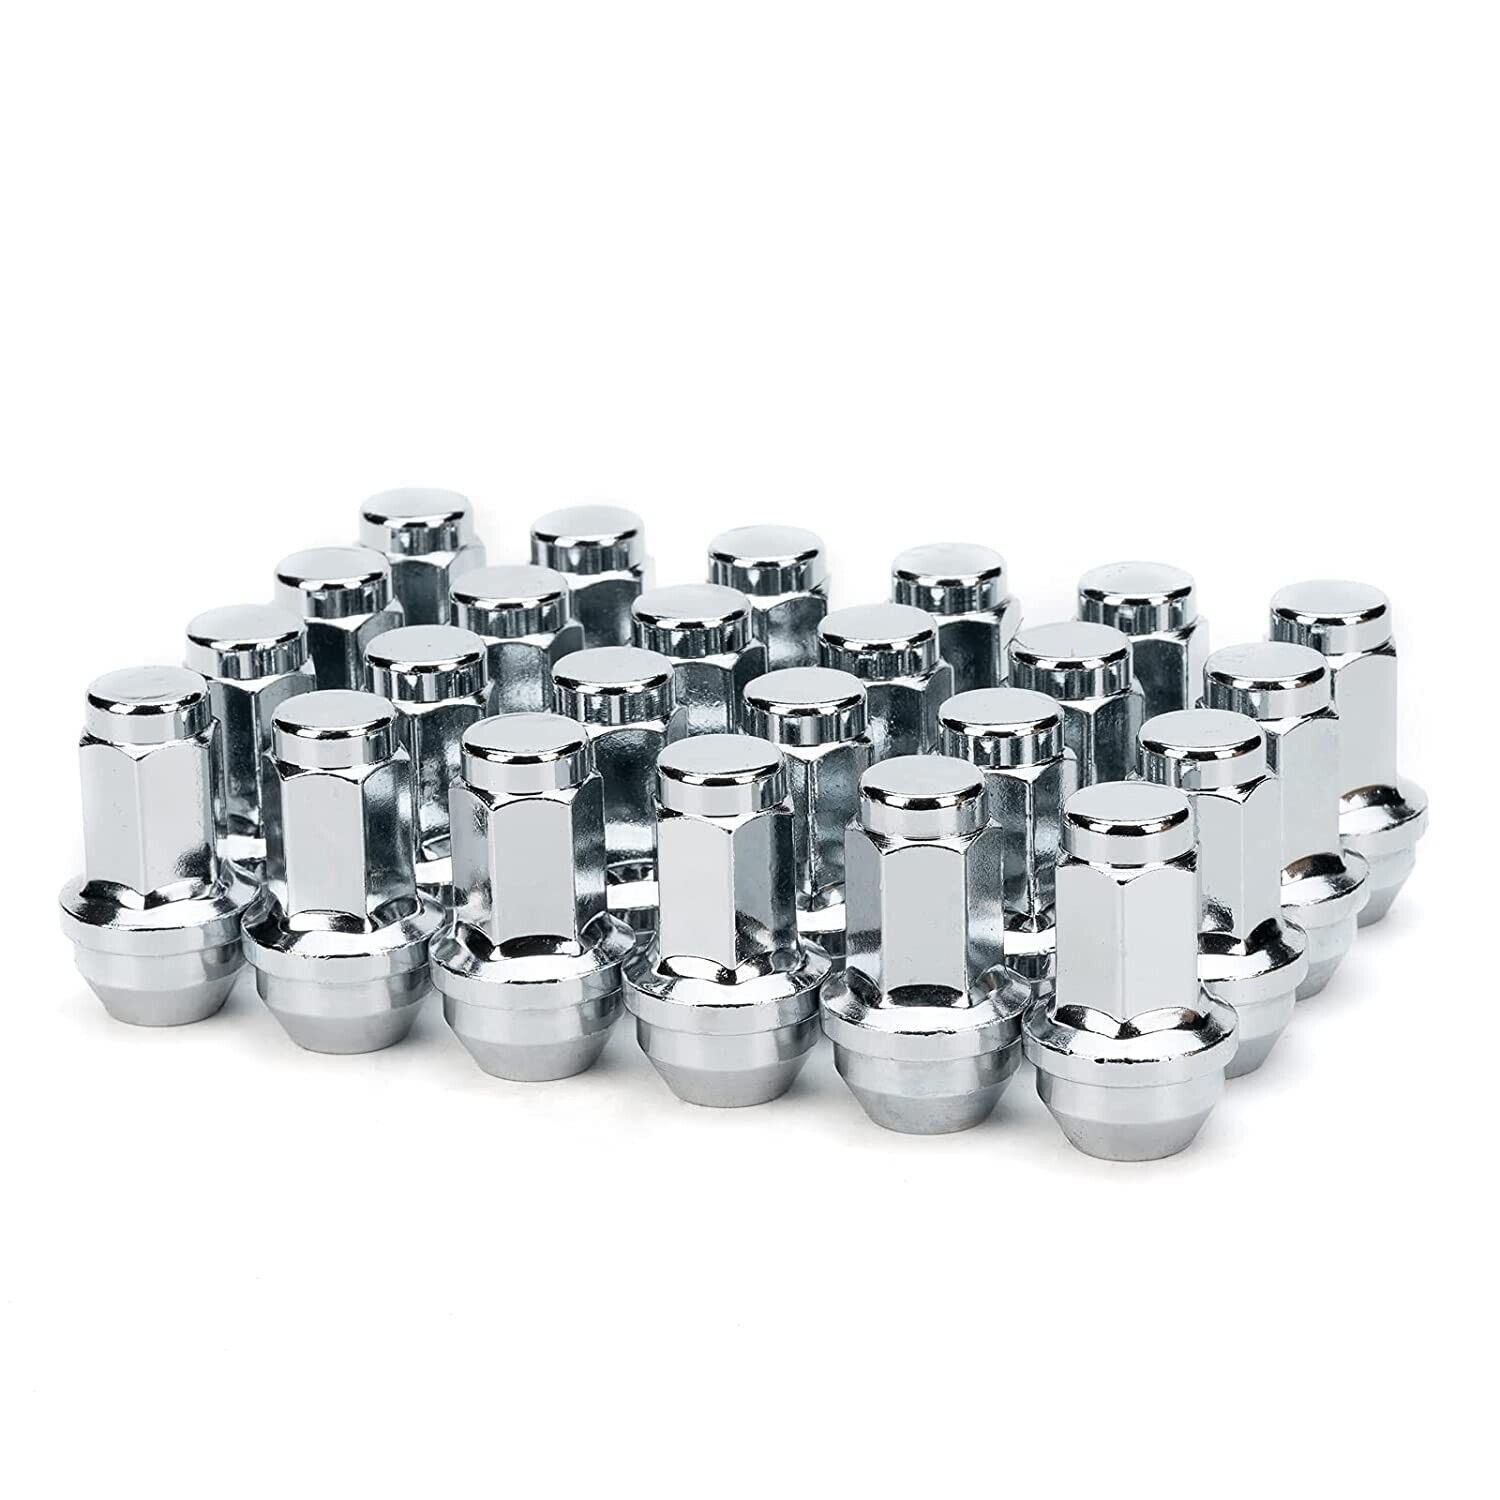 24 Chrome Wheel Lug Nuts Fit F150 00-14,Expedition 03-14,Lincoln Navigator 03-14